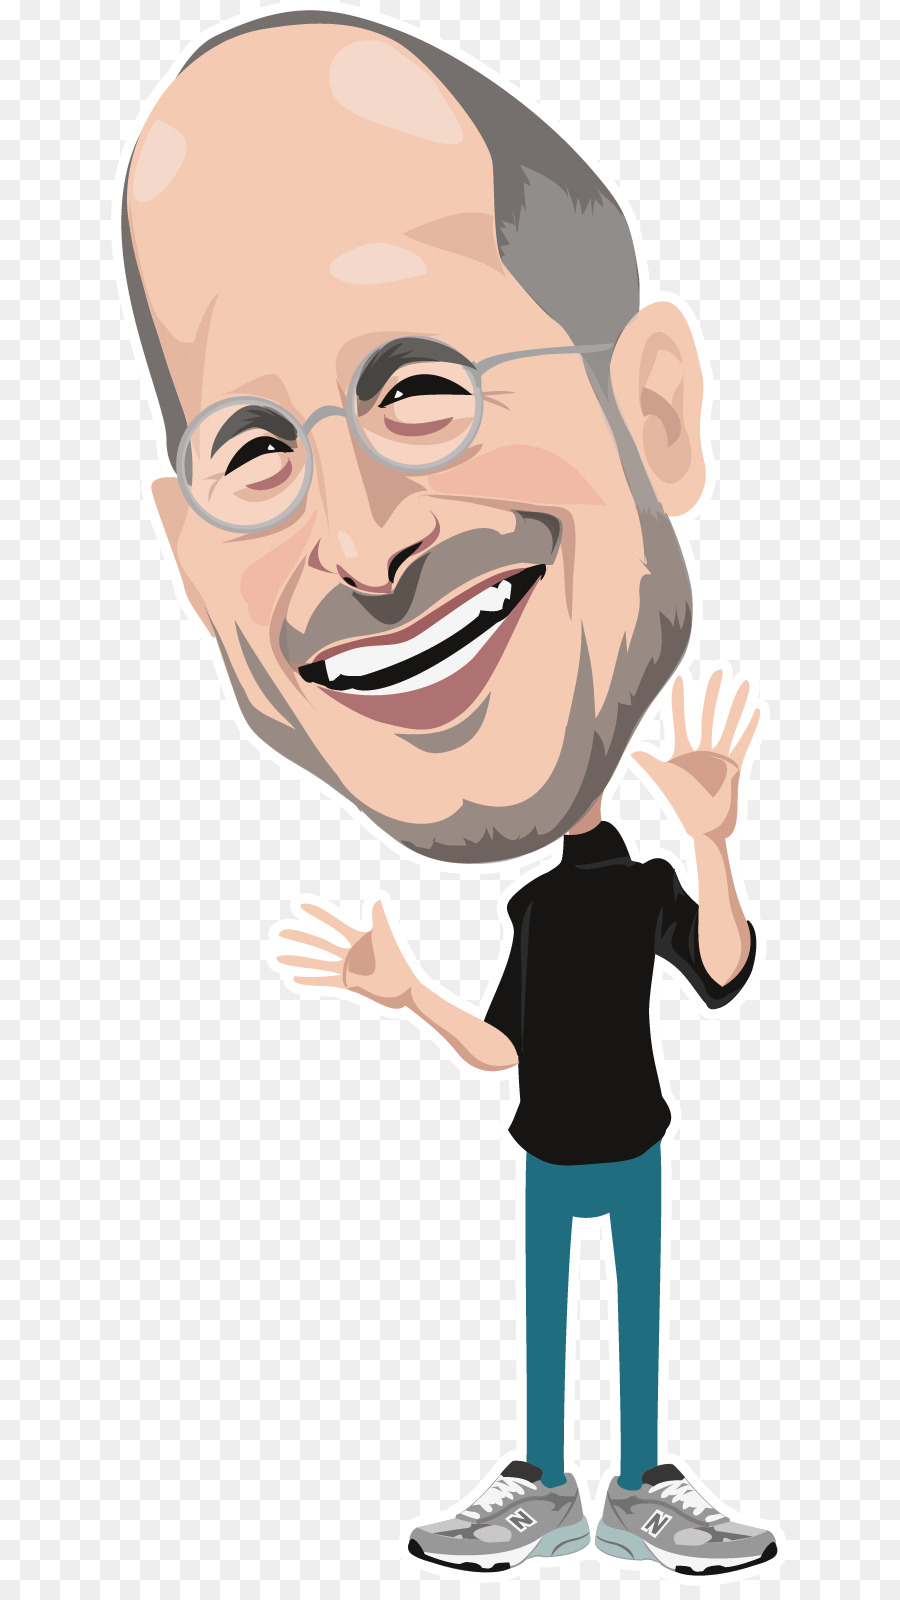 Steve Jobs Icon At Vectorified Collection Of Steve Jobs Icon Free For Personal Use